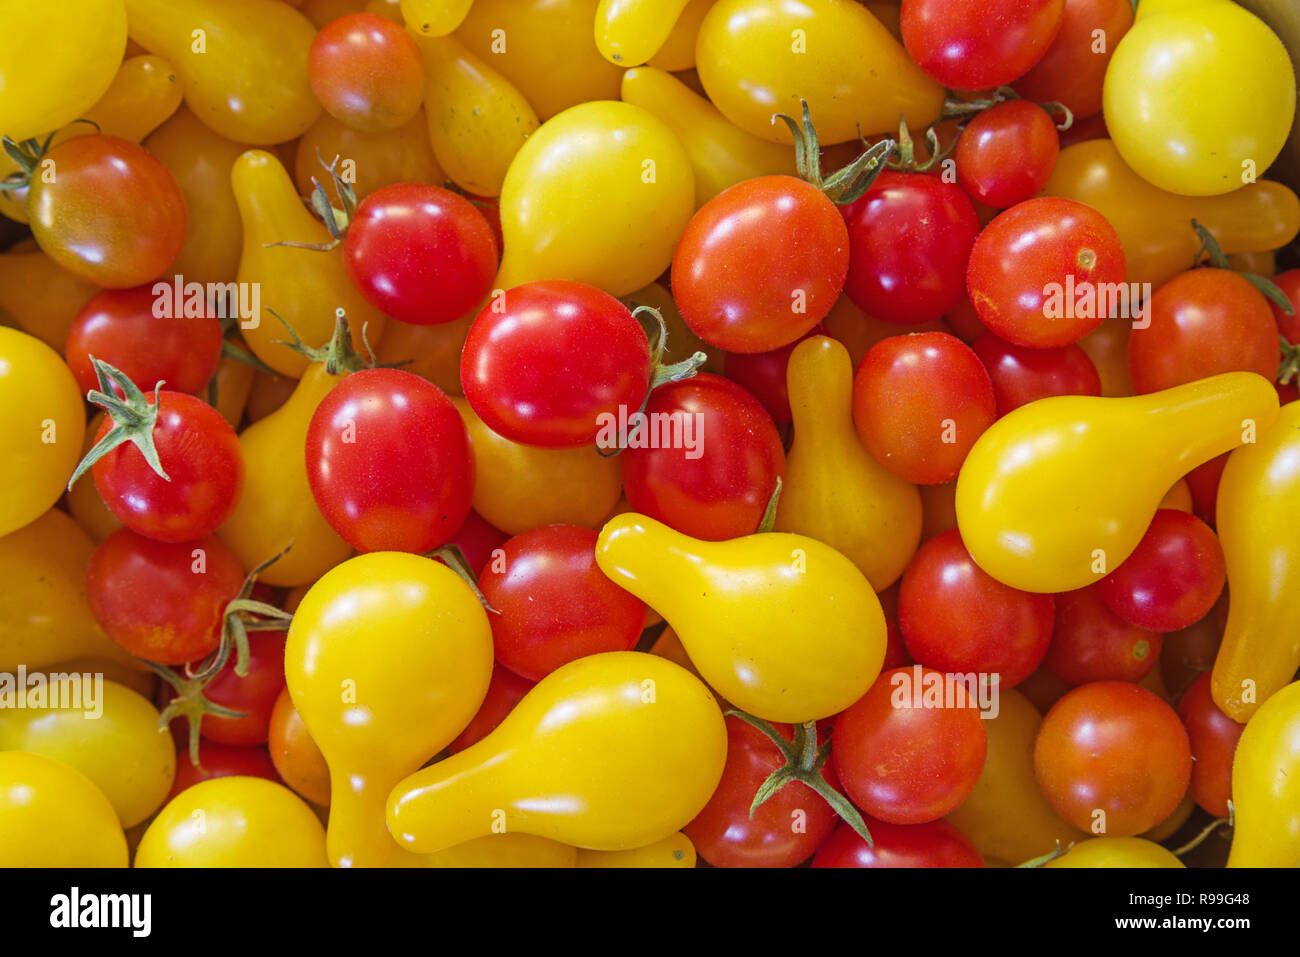 red and yellow pear cherry tomatoes from a home garden Stock Photo